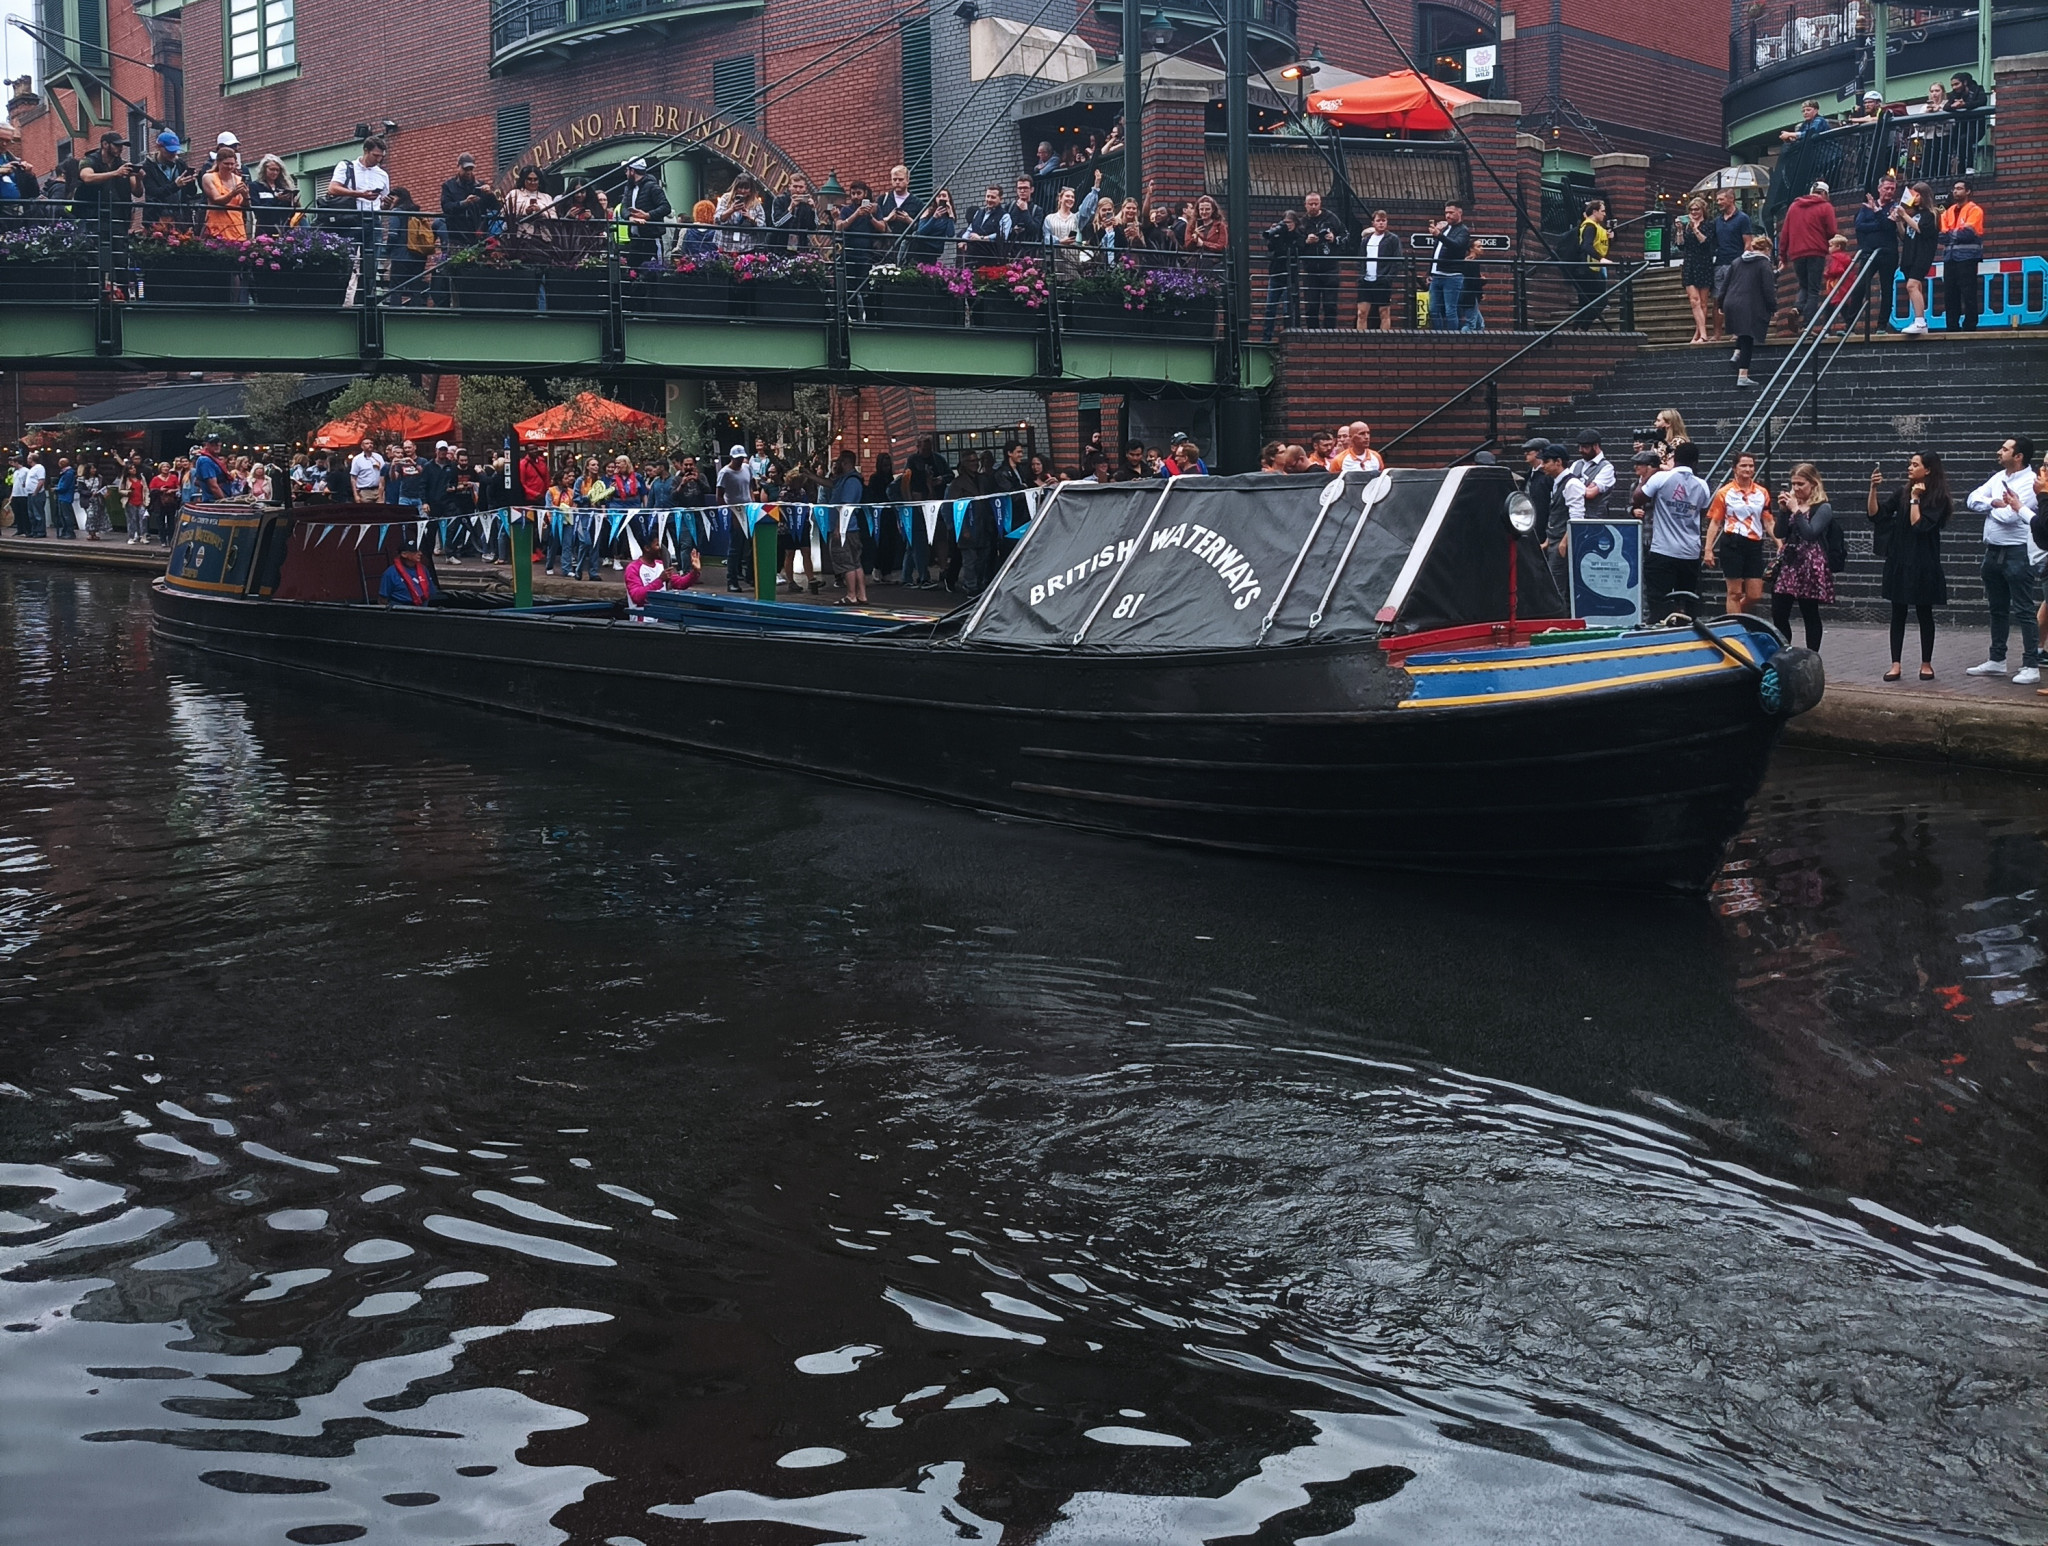 Dr Kishan Bodalia carried the Baton on board a canalboat as it made its journey around Birmingham ©ITG